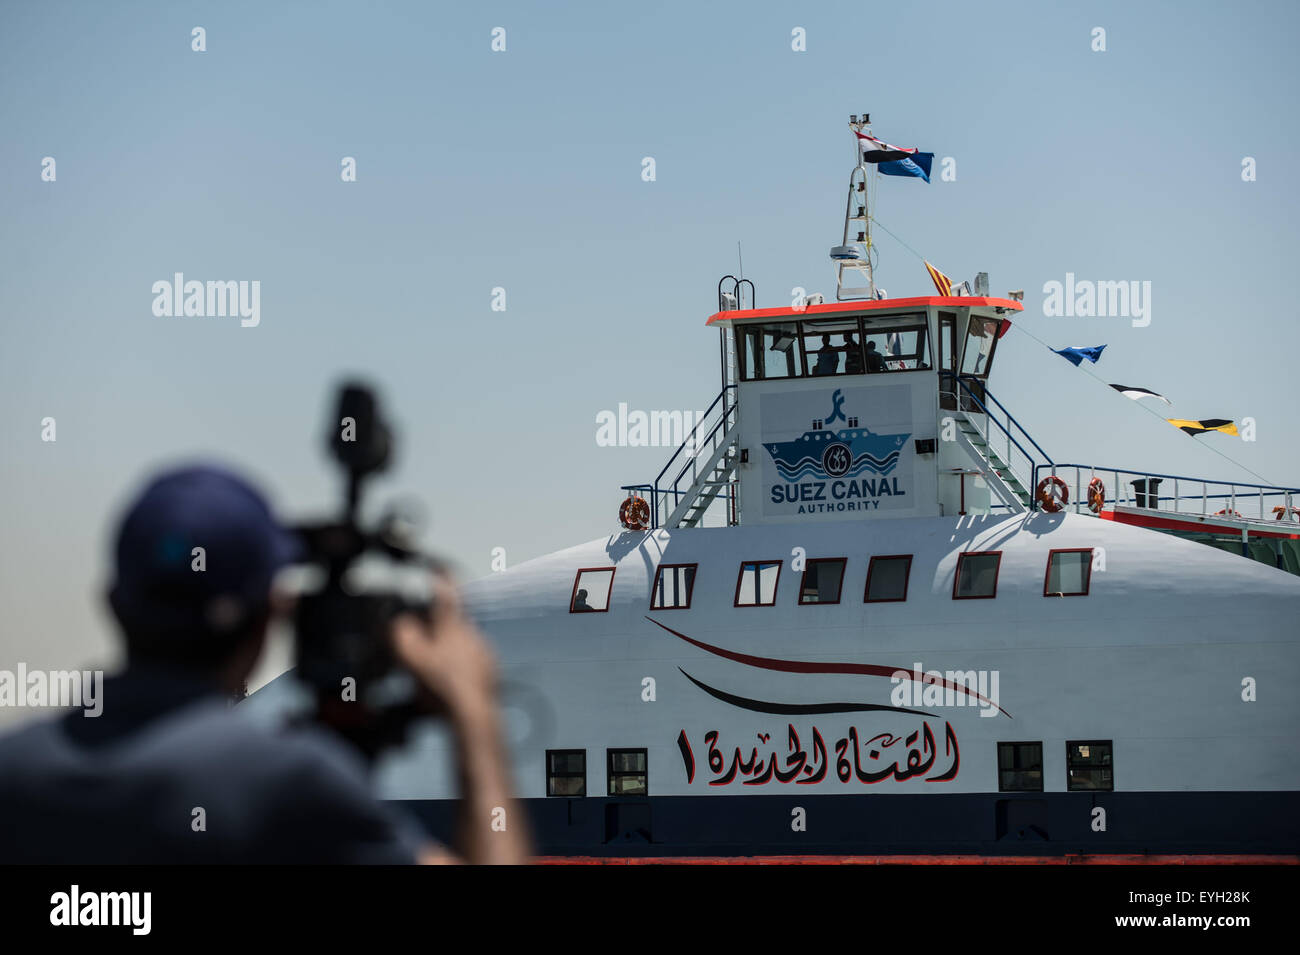 Ismailia, Egypt. 29th July, 2015. A cameraman takes video clips on the new Suez Canal in Ismailia, a port city in Egypt, on July 29, 2015. The dredging work of Egypt's "New Suez Canal" has been completed and the waterway is ready as well as safe for huge ship navigation, Mohab Memish, head of the Suez Canal Authority (SCA), told reporters in a press conference Wednesday. © Pan Chaoyue/Xinhua/Alamy Live News Stock Photo